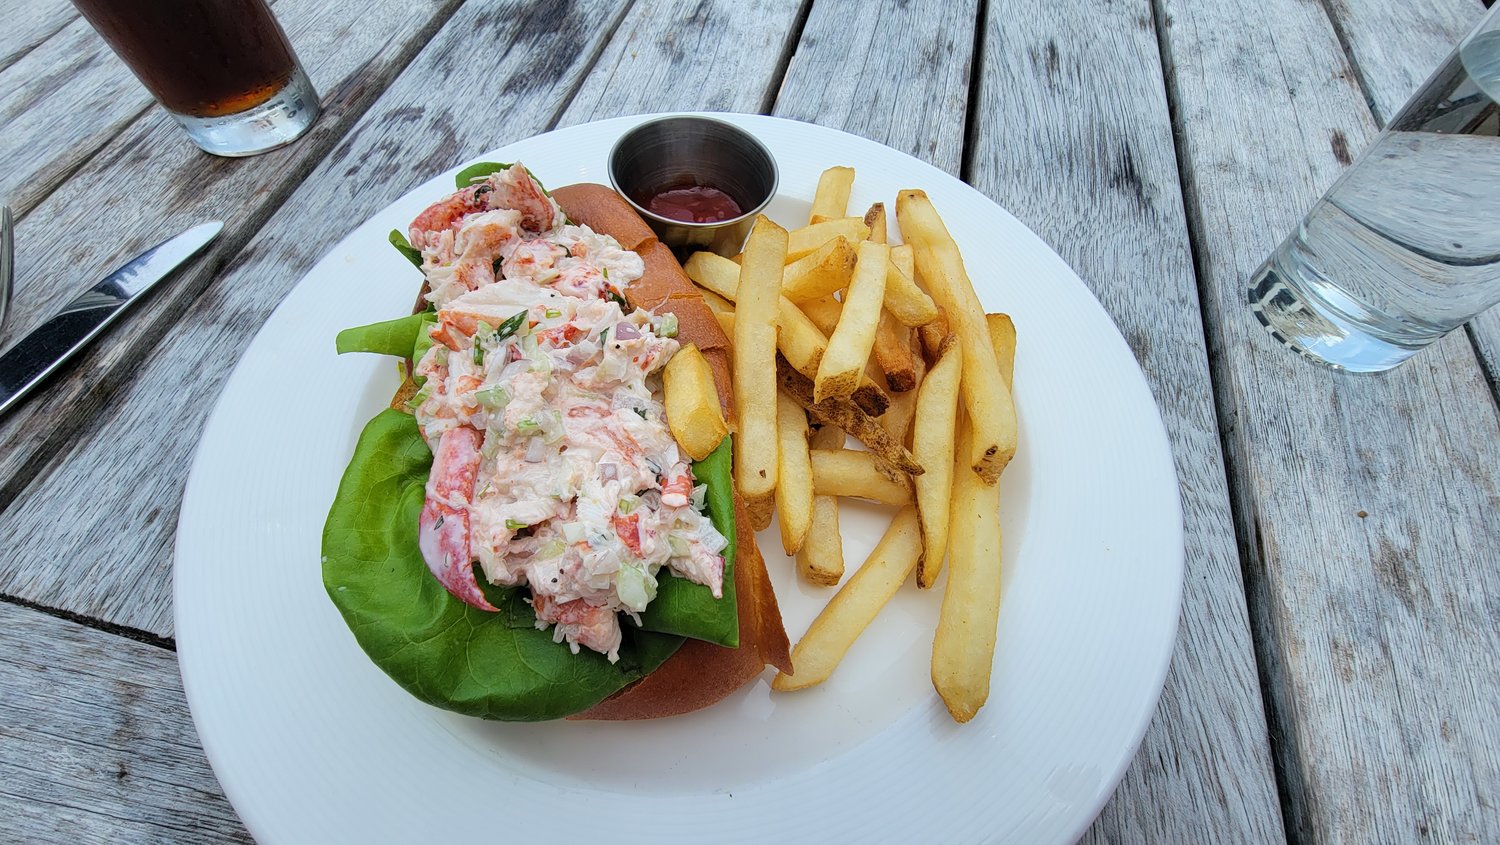 The Breeze’s lobster roll is overflowing with lobster meat poached in tarragon butter and mixed with finely-diced celery and onion.